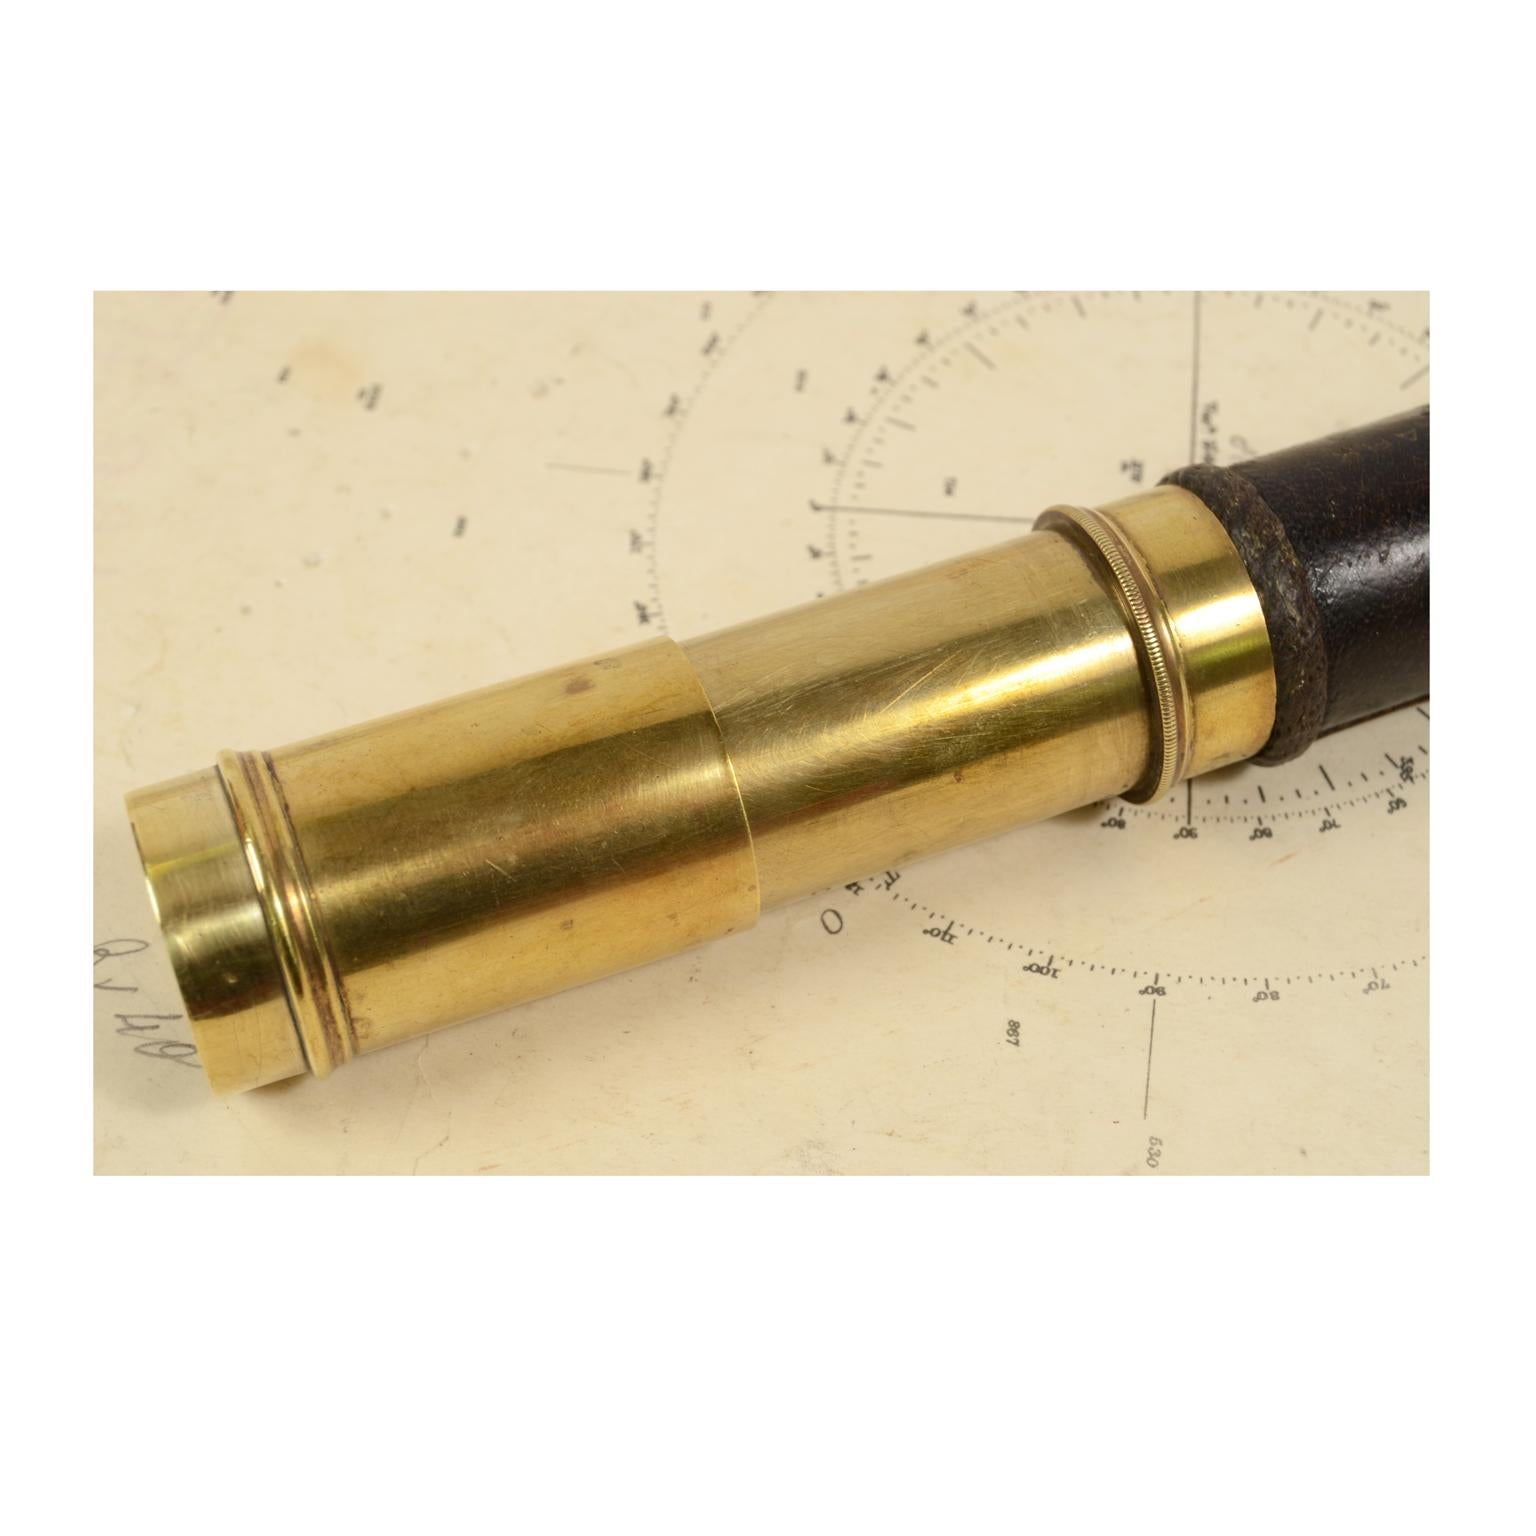 Antique Nautical Telescope, Brass and Leather, Mid-19th Century 2